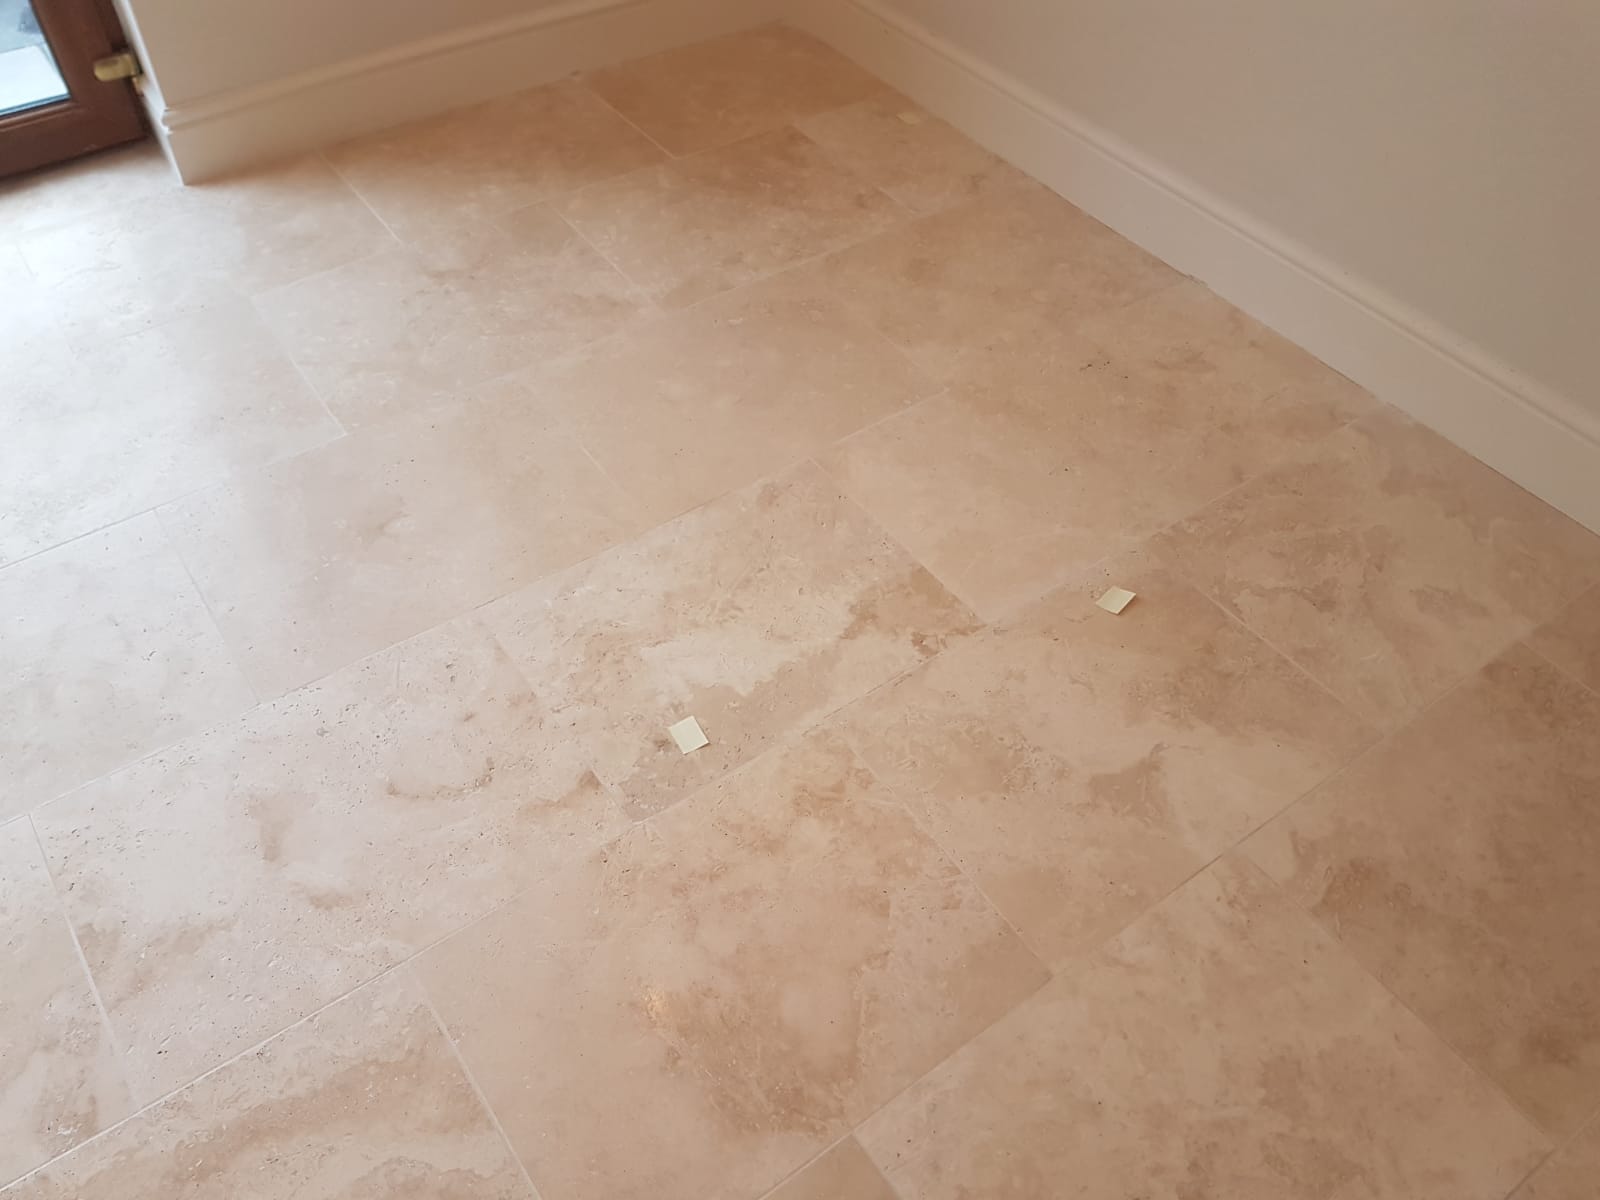 Travertine Floor with Lippage Issues Before Milling in Gower Swansea